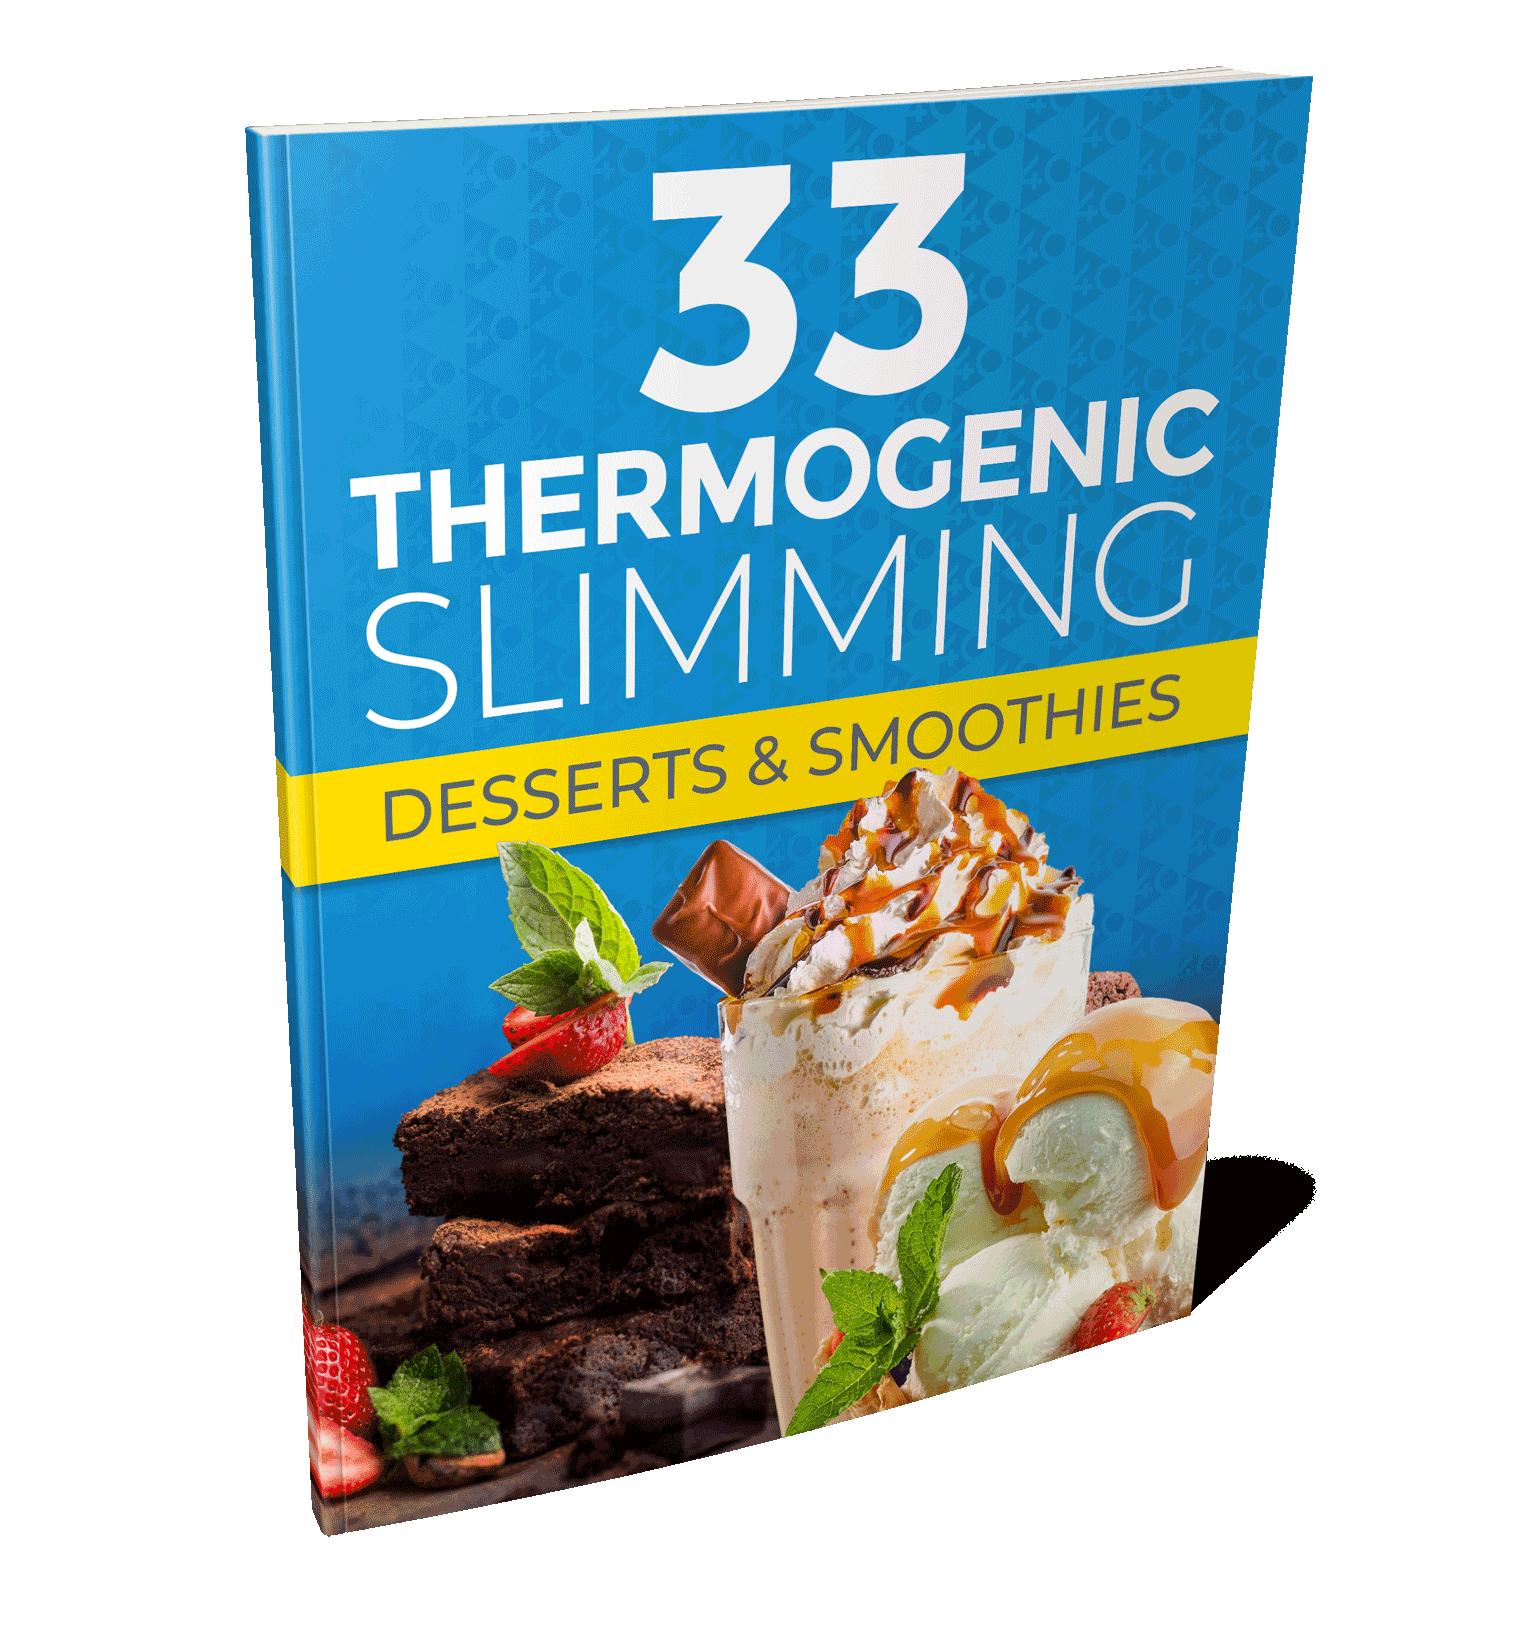 33 Thermogenic Slimming Desserts and Smoothies Guide